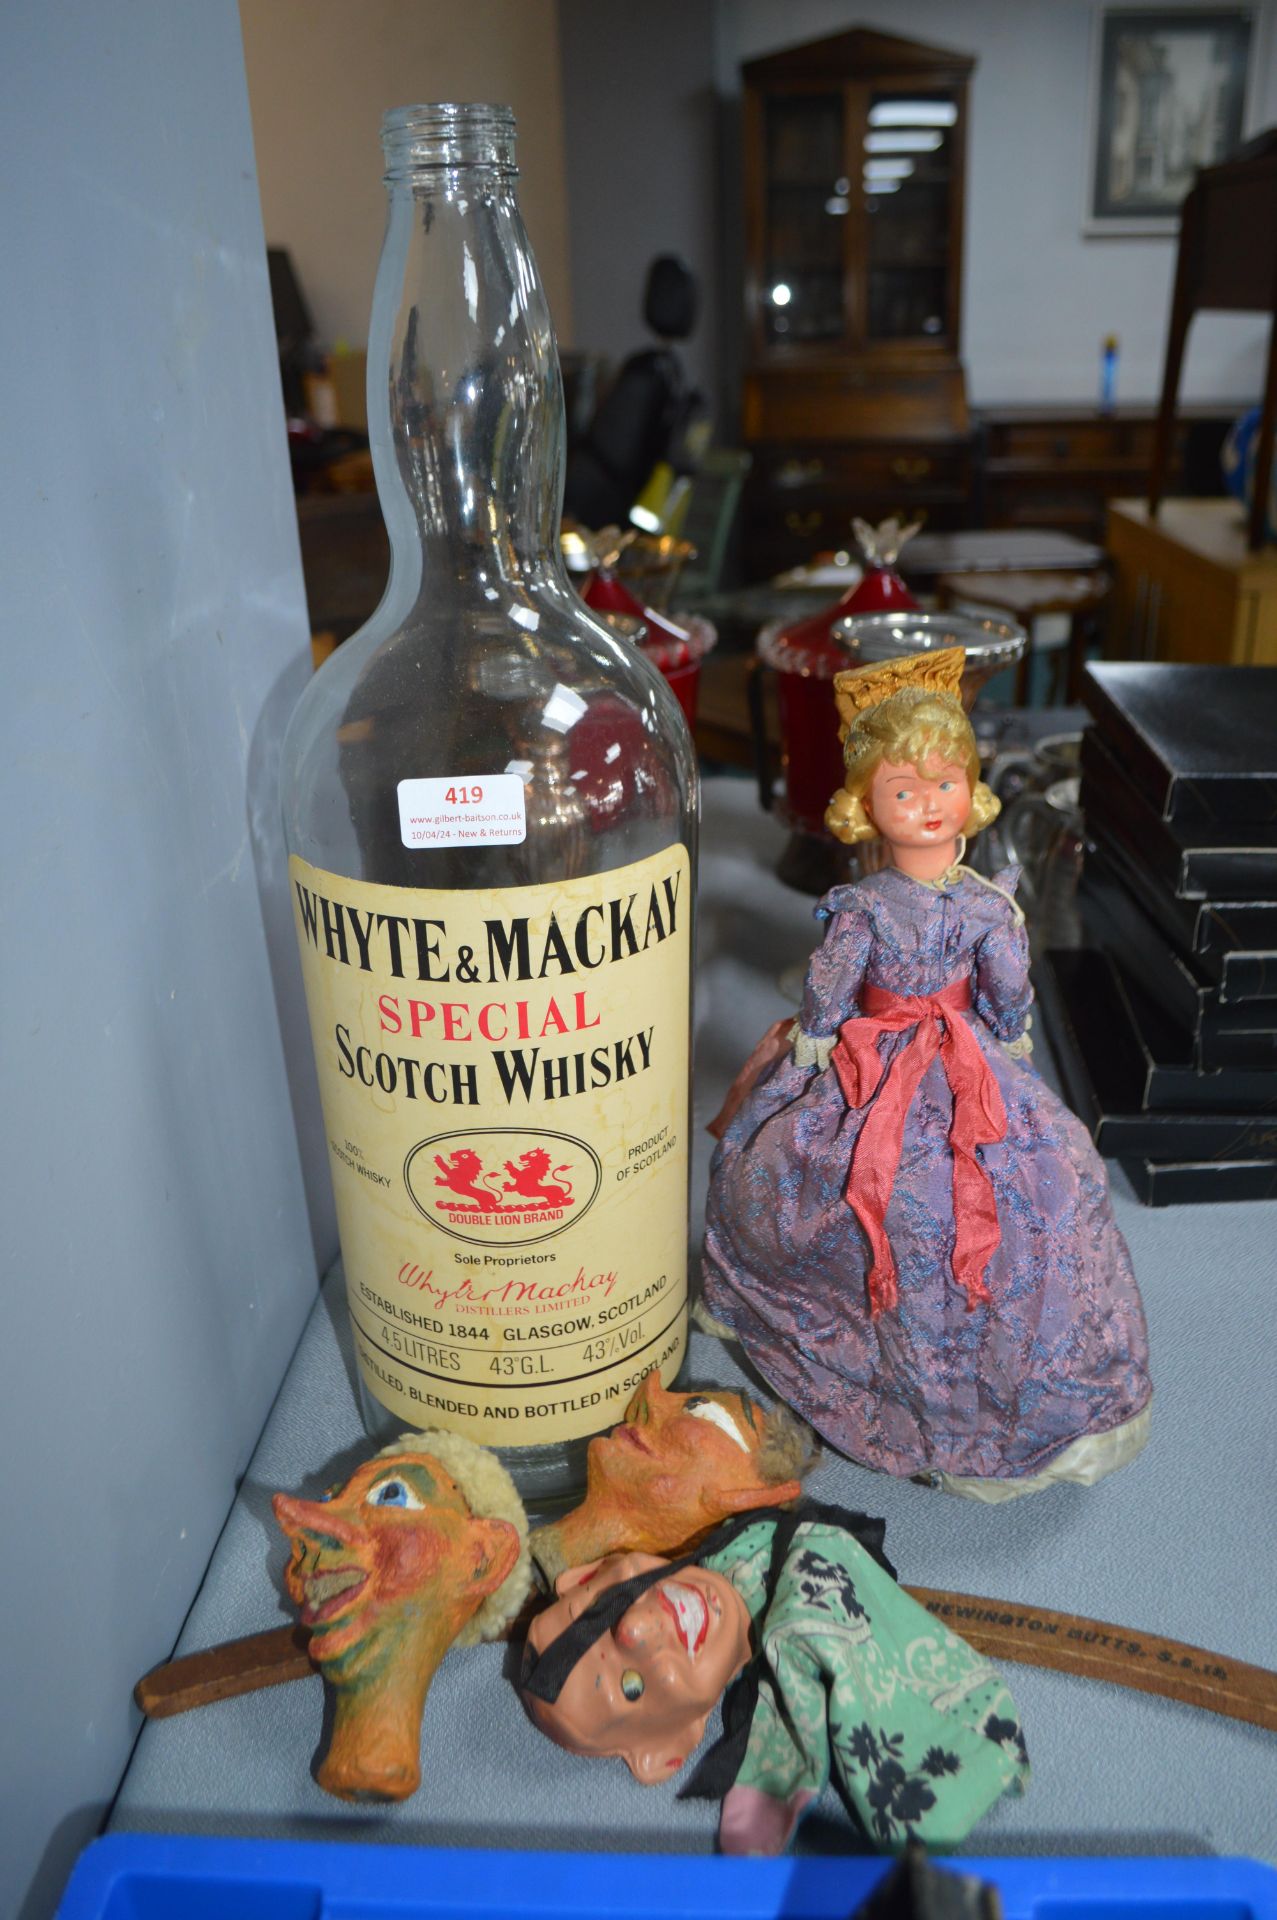 Puppet, Dolls, and a Whiskey Bottle